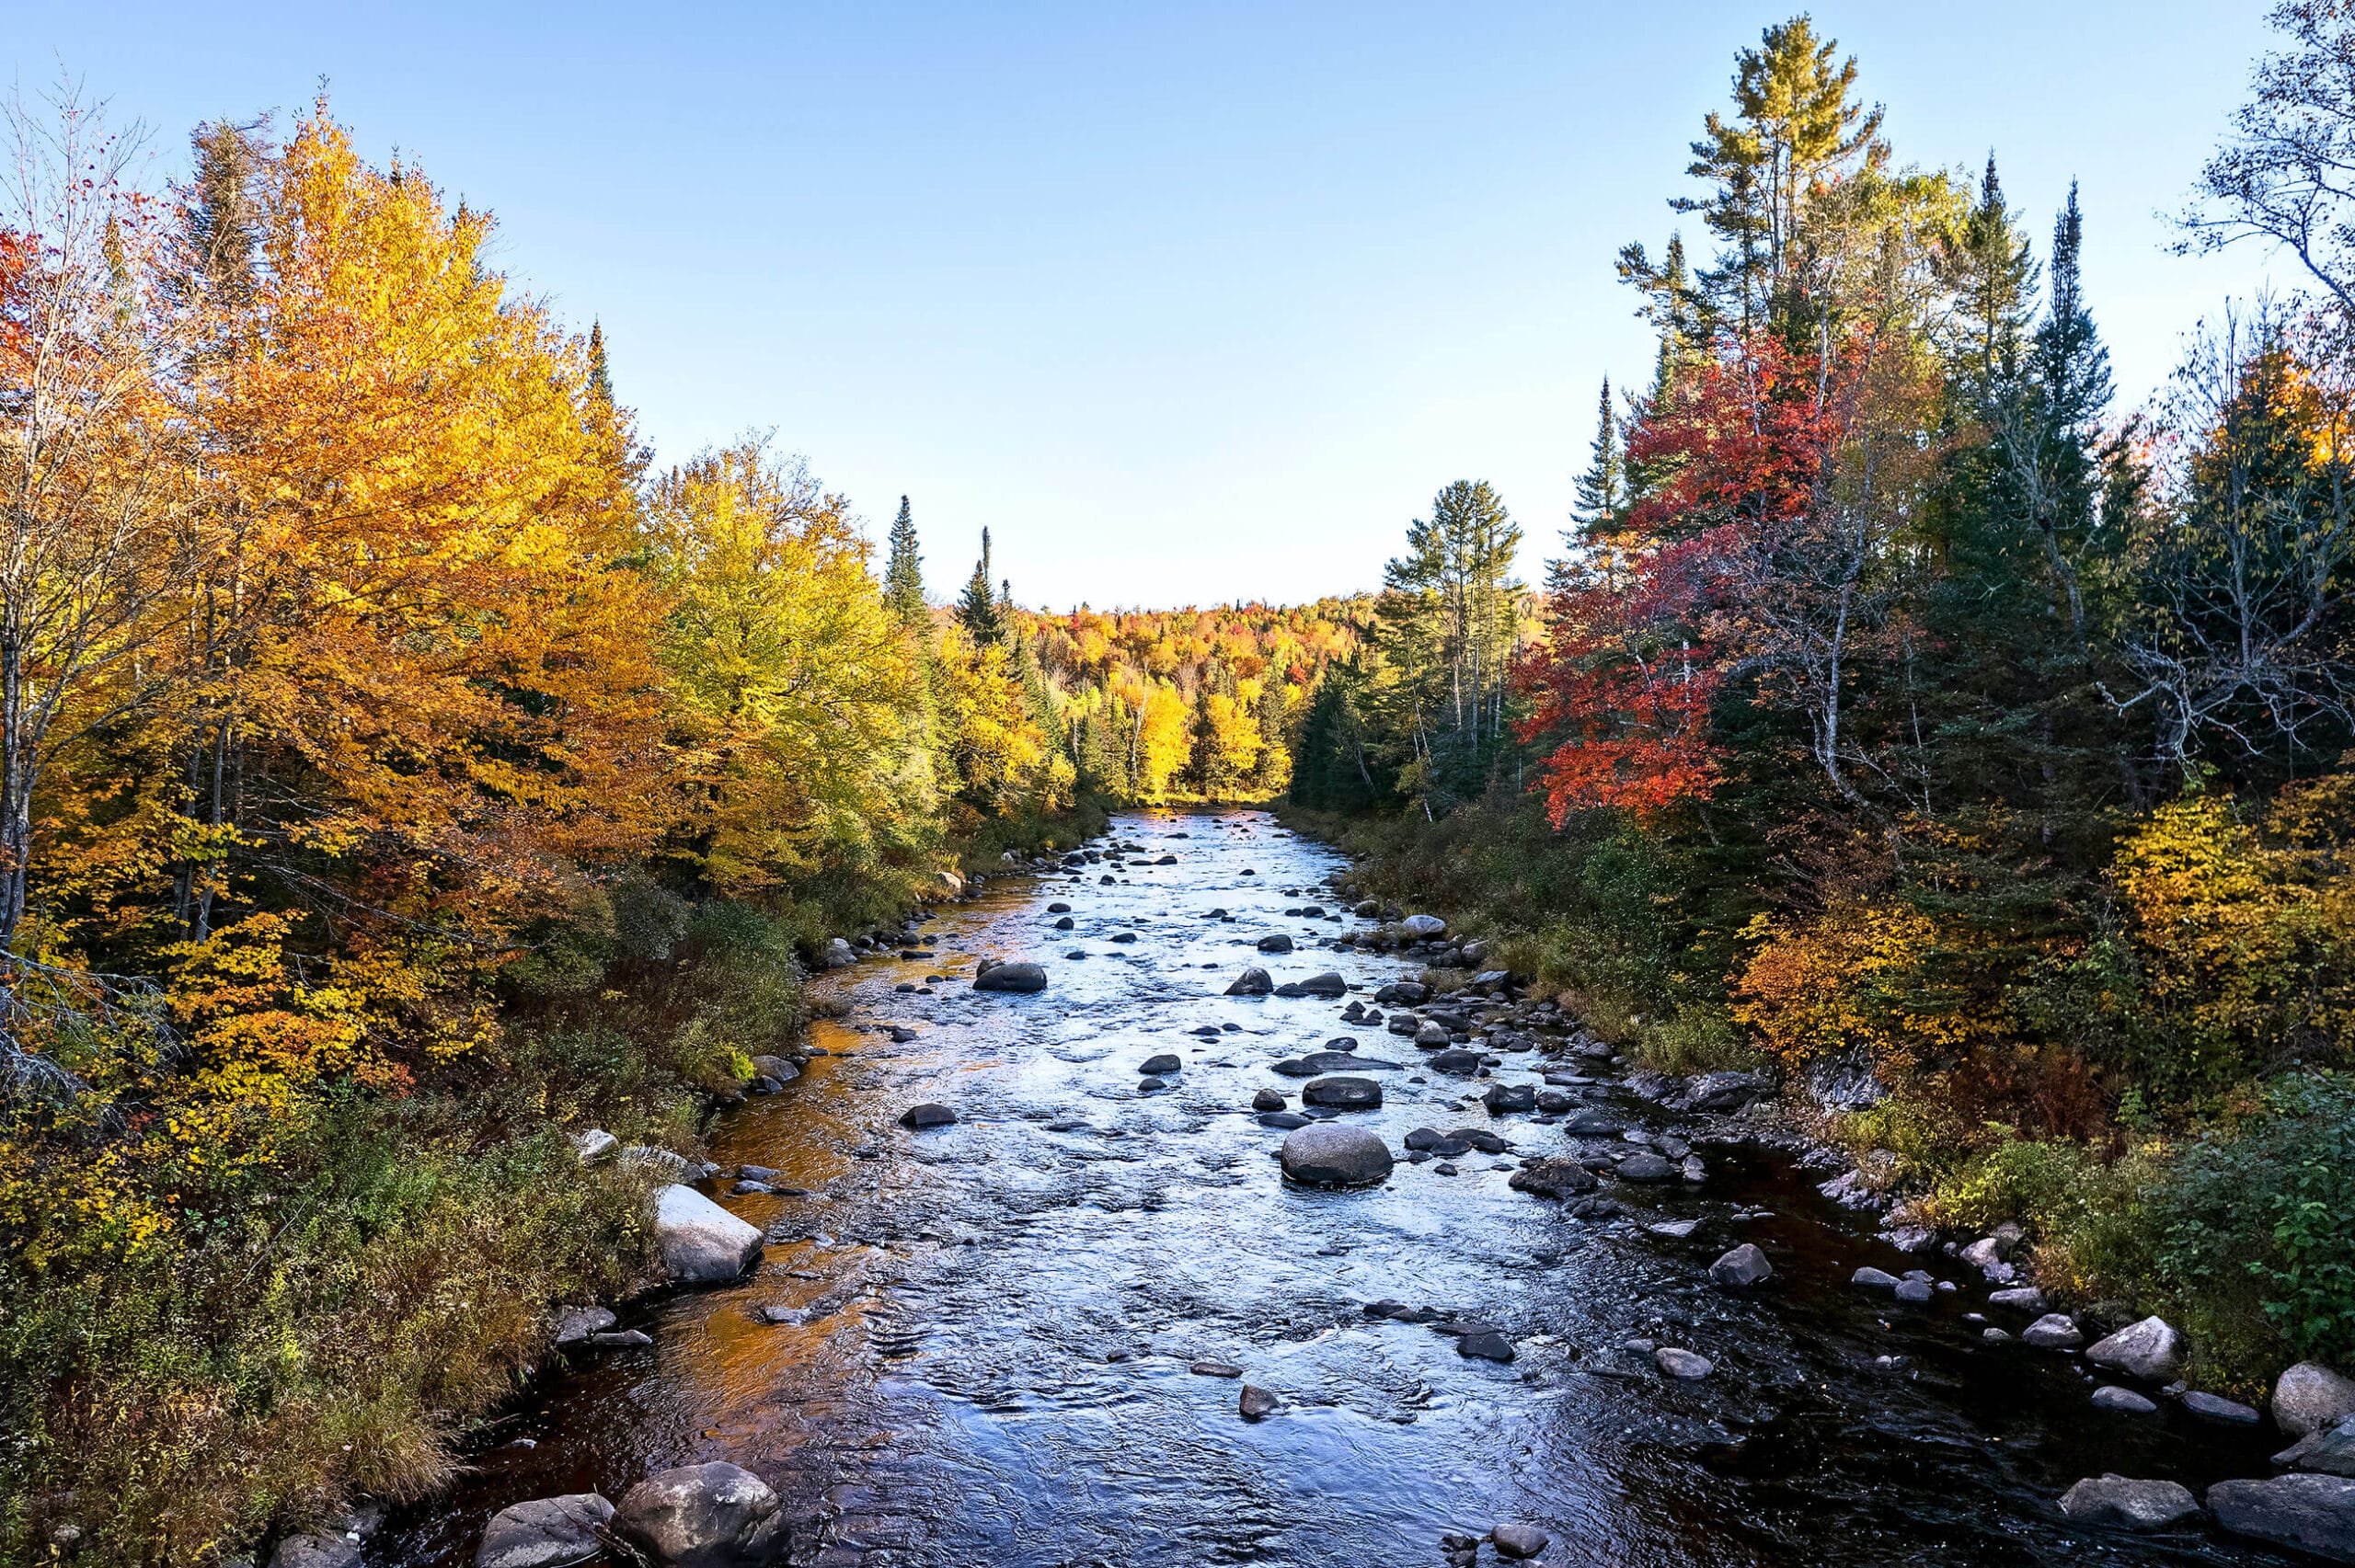 A river surrounded by trees in the fall.